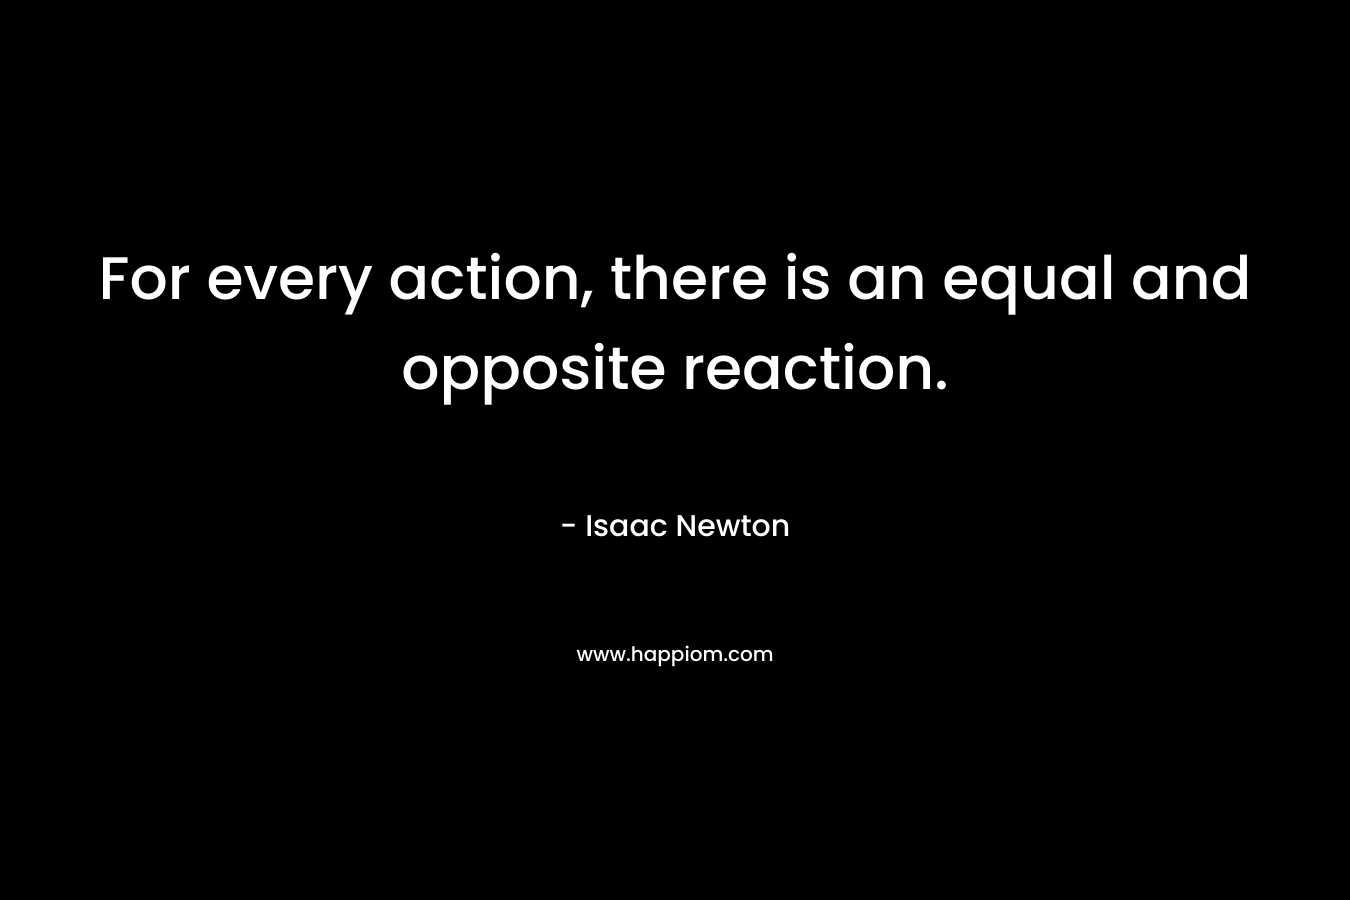 For every action, there is an equal and opposite reaction. – Isaac Newton